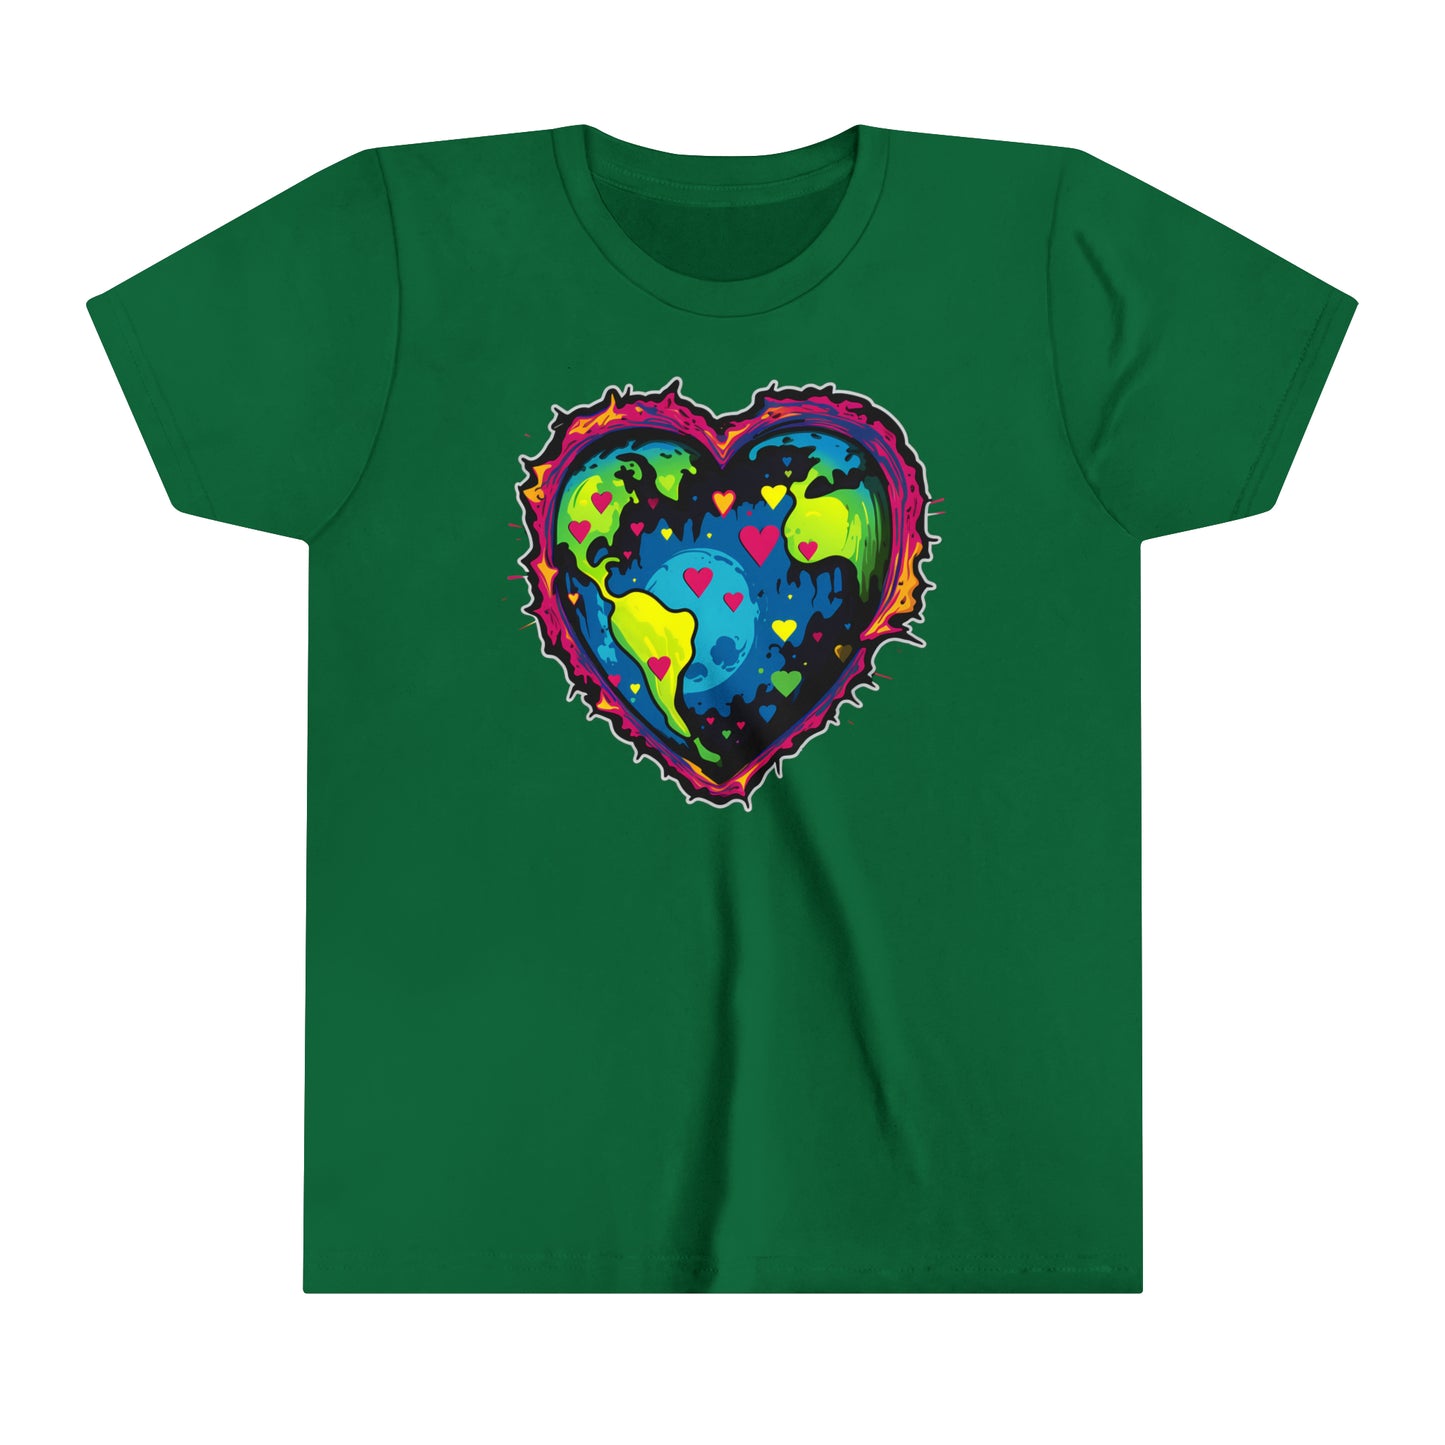 Neon 80's Earth T-Shirt - Youth